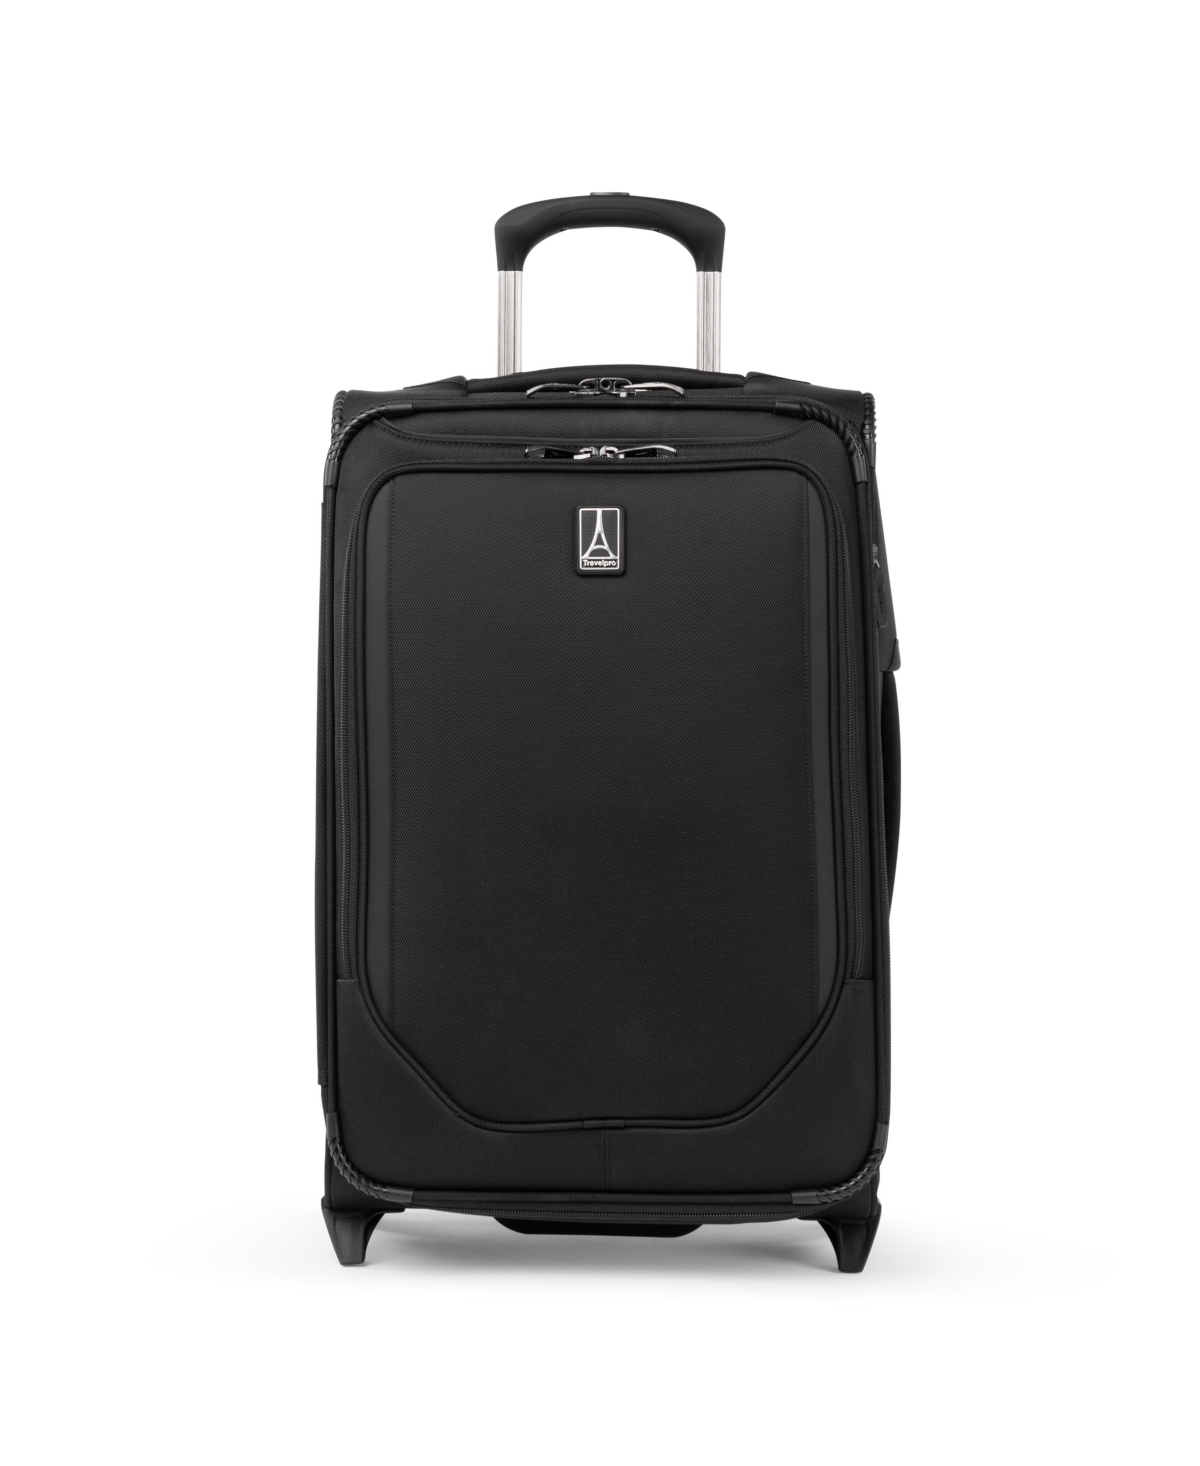 New! Travelpro Crew Classic Carry-on Expandable Rollaboard Luggage - Patriot Blue